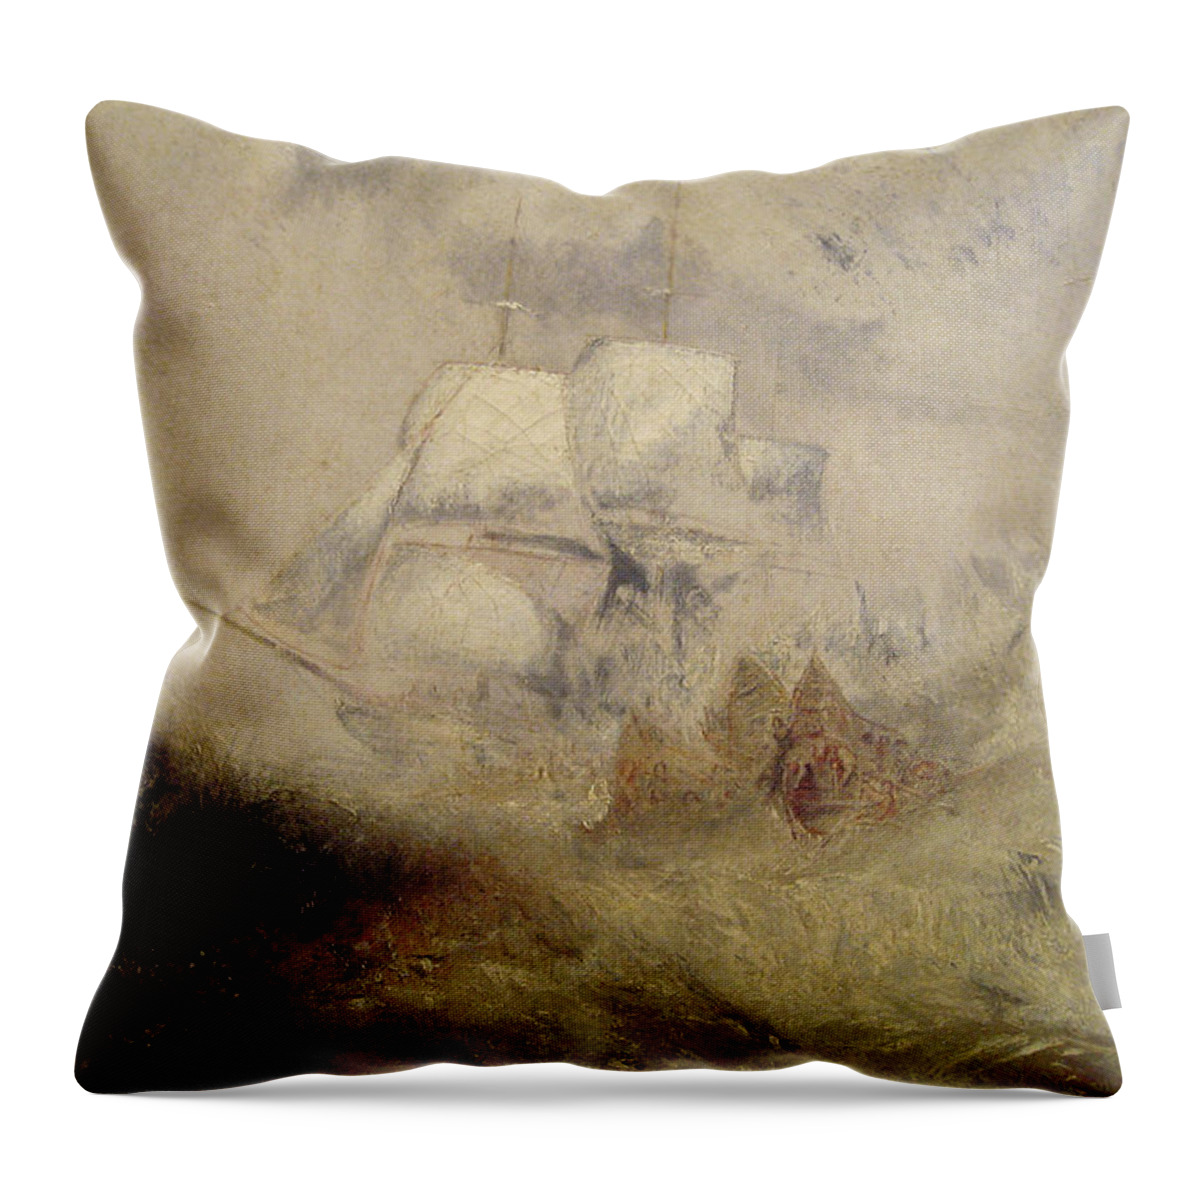 Whaler Throw Pillow featuring the painting The Whale Ship by Joseph Turner